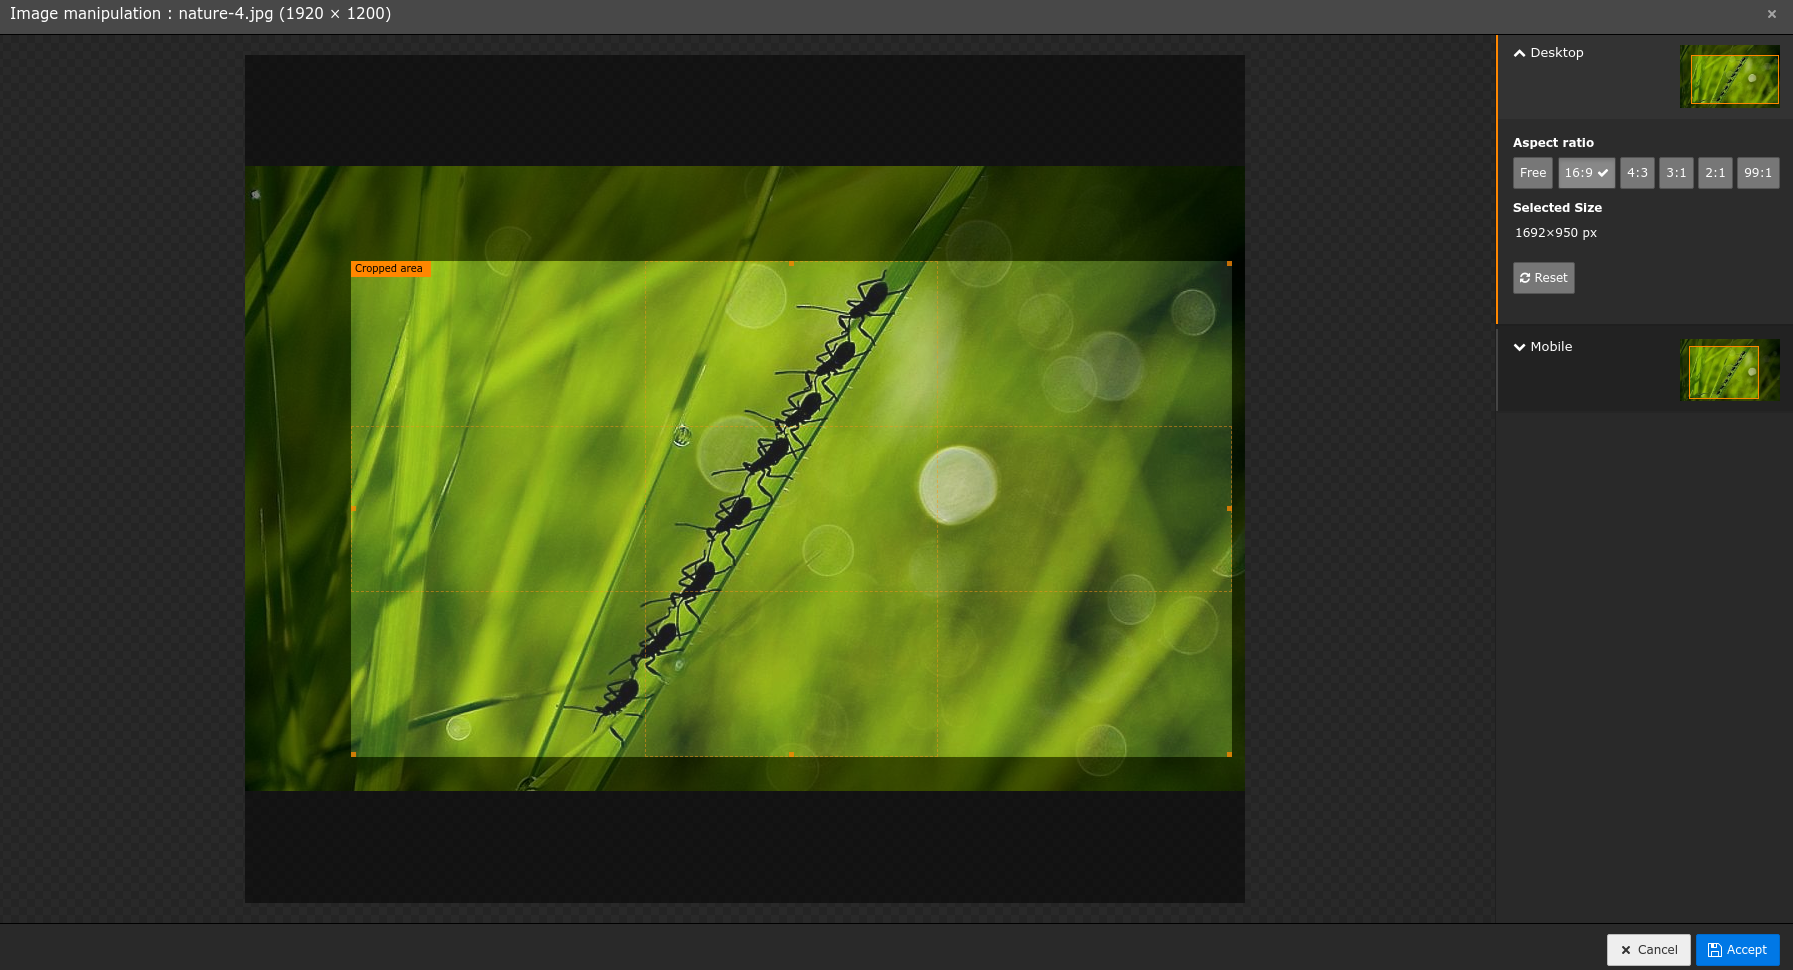 The image manipulation wizard with two crop variants for default and mobile in TYPO3 8.7